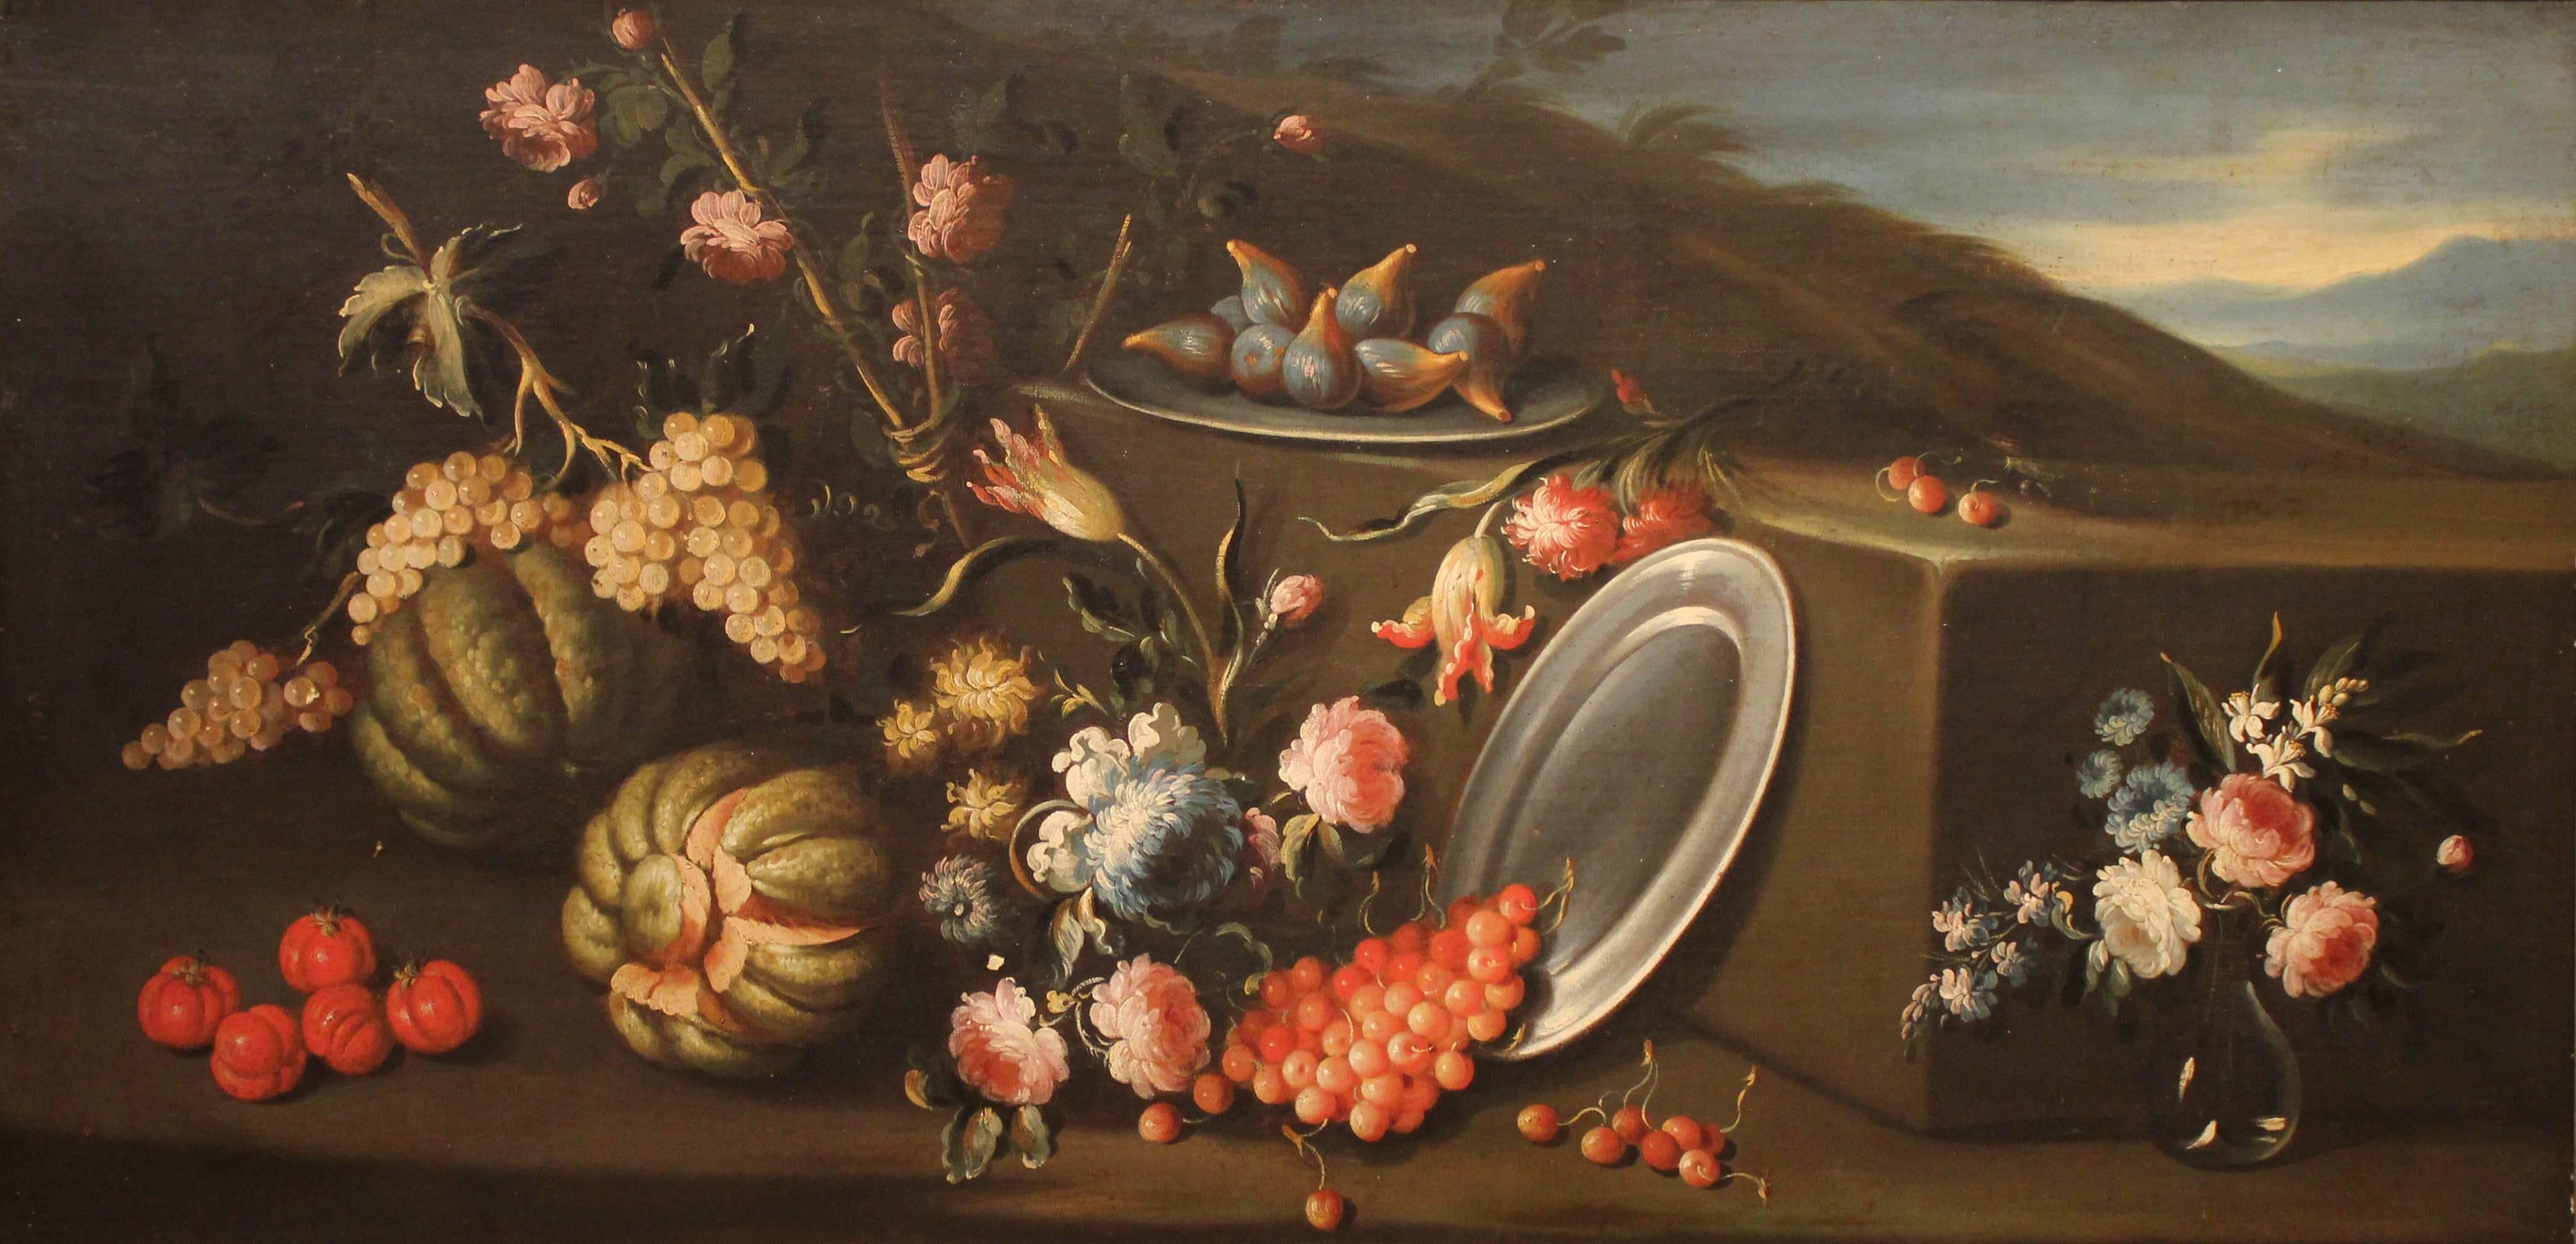 Attr. Giuseppe Pesci (Parma?-1722) 
"Still Life with Grapes" ca. 1720
Oil on Canvas
42" x 77" inches framed
34" x 68" inches unframed

Refined in his creations, the Giuseppe Pesci elegantly expresses his adherence to the rocaille taste of northern